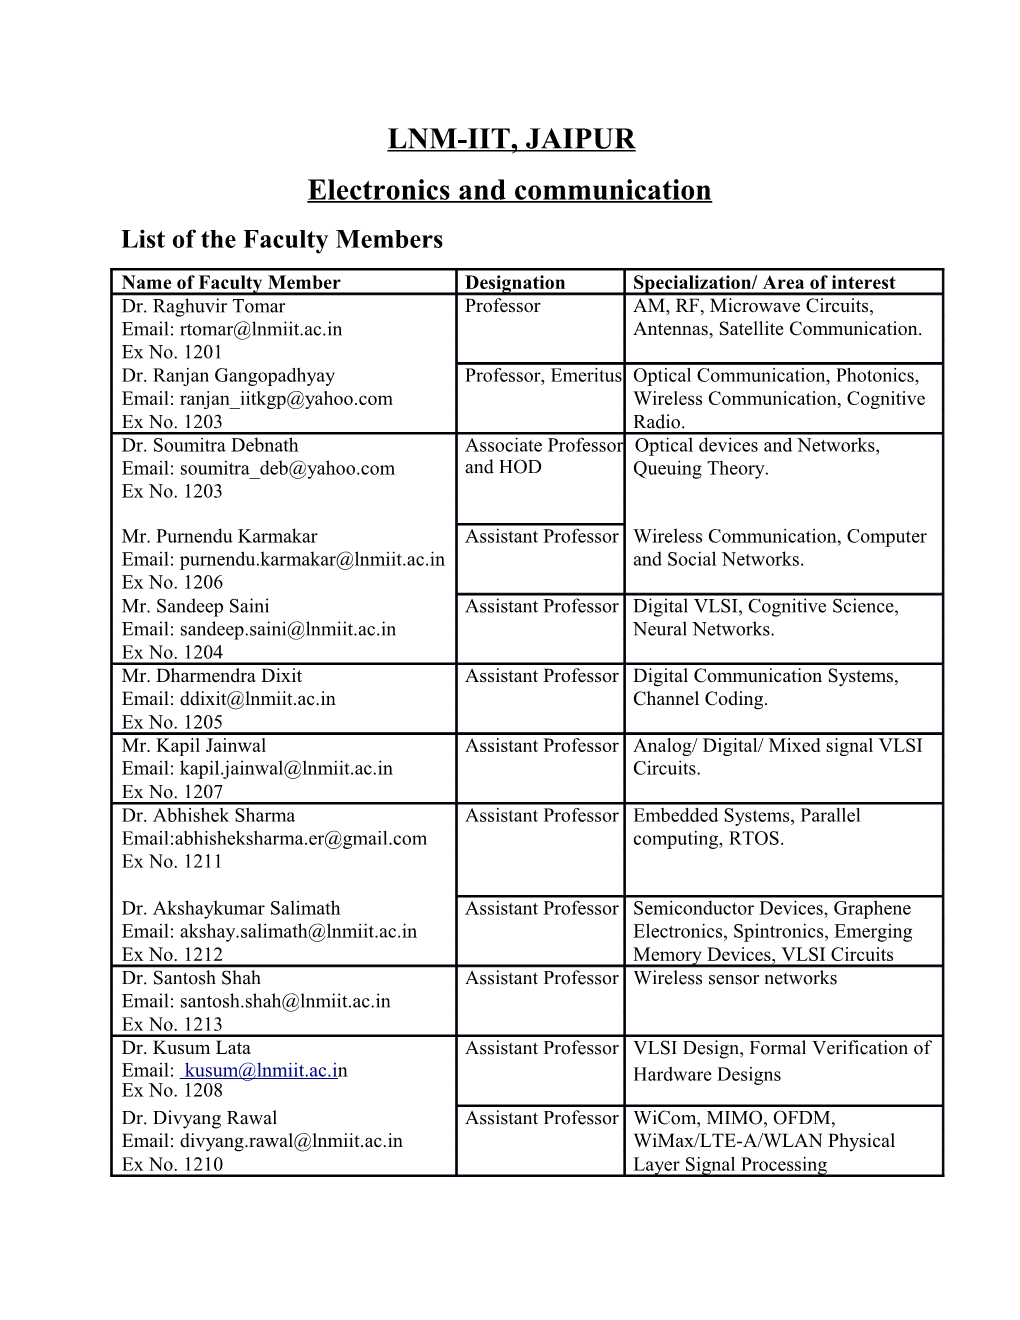 List of the Faculty Members